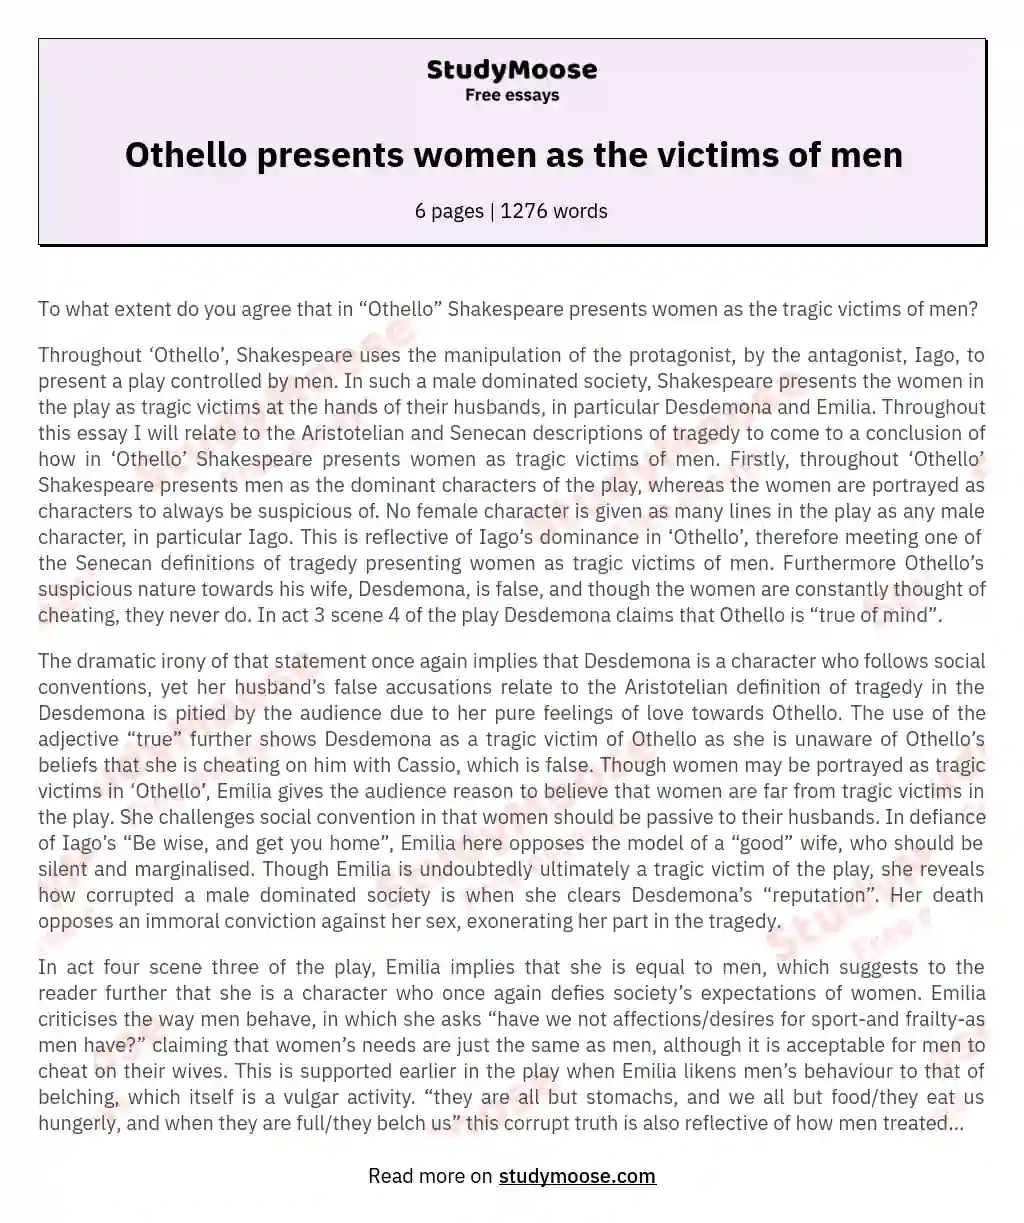 Othello presents women as the victims of men essay